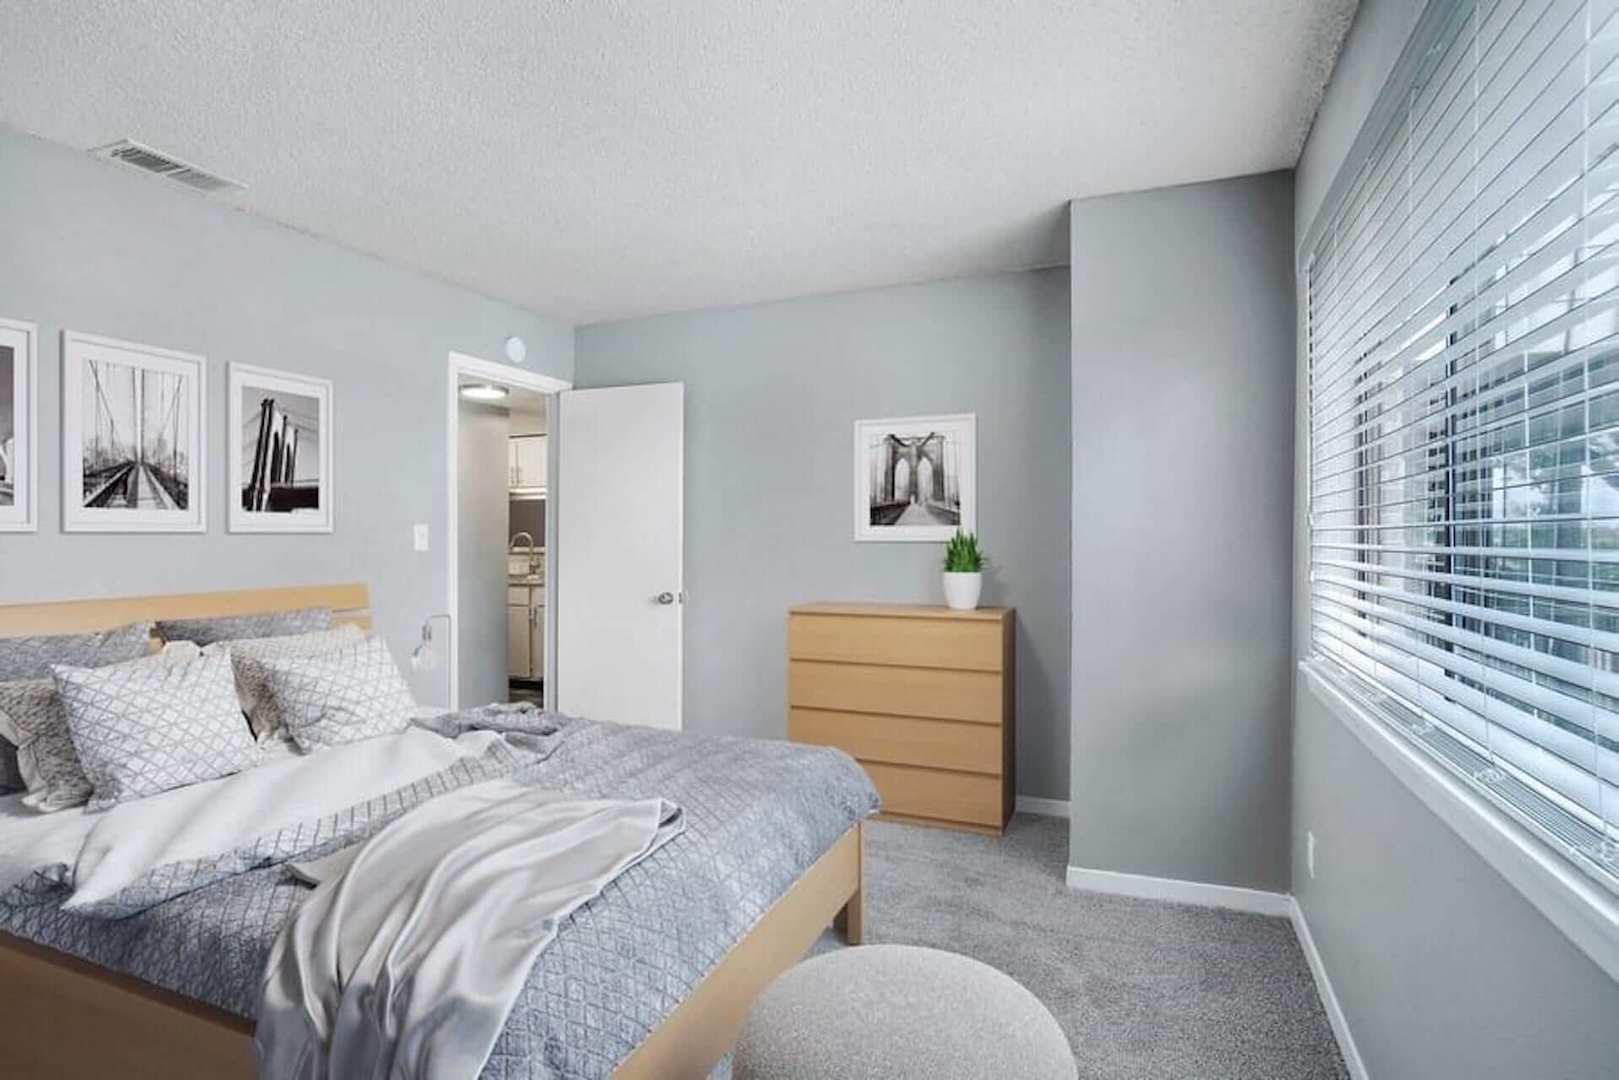 Bedroom with queen size bed and large window